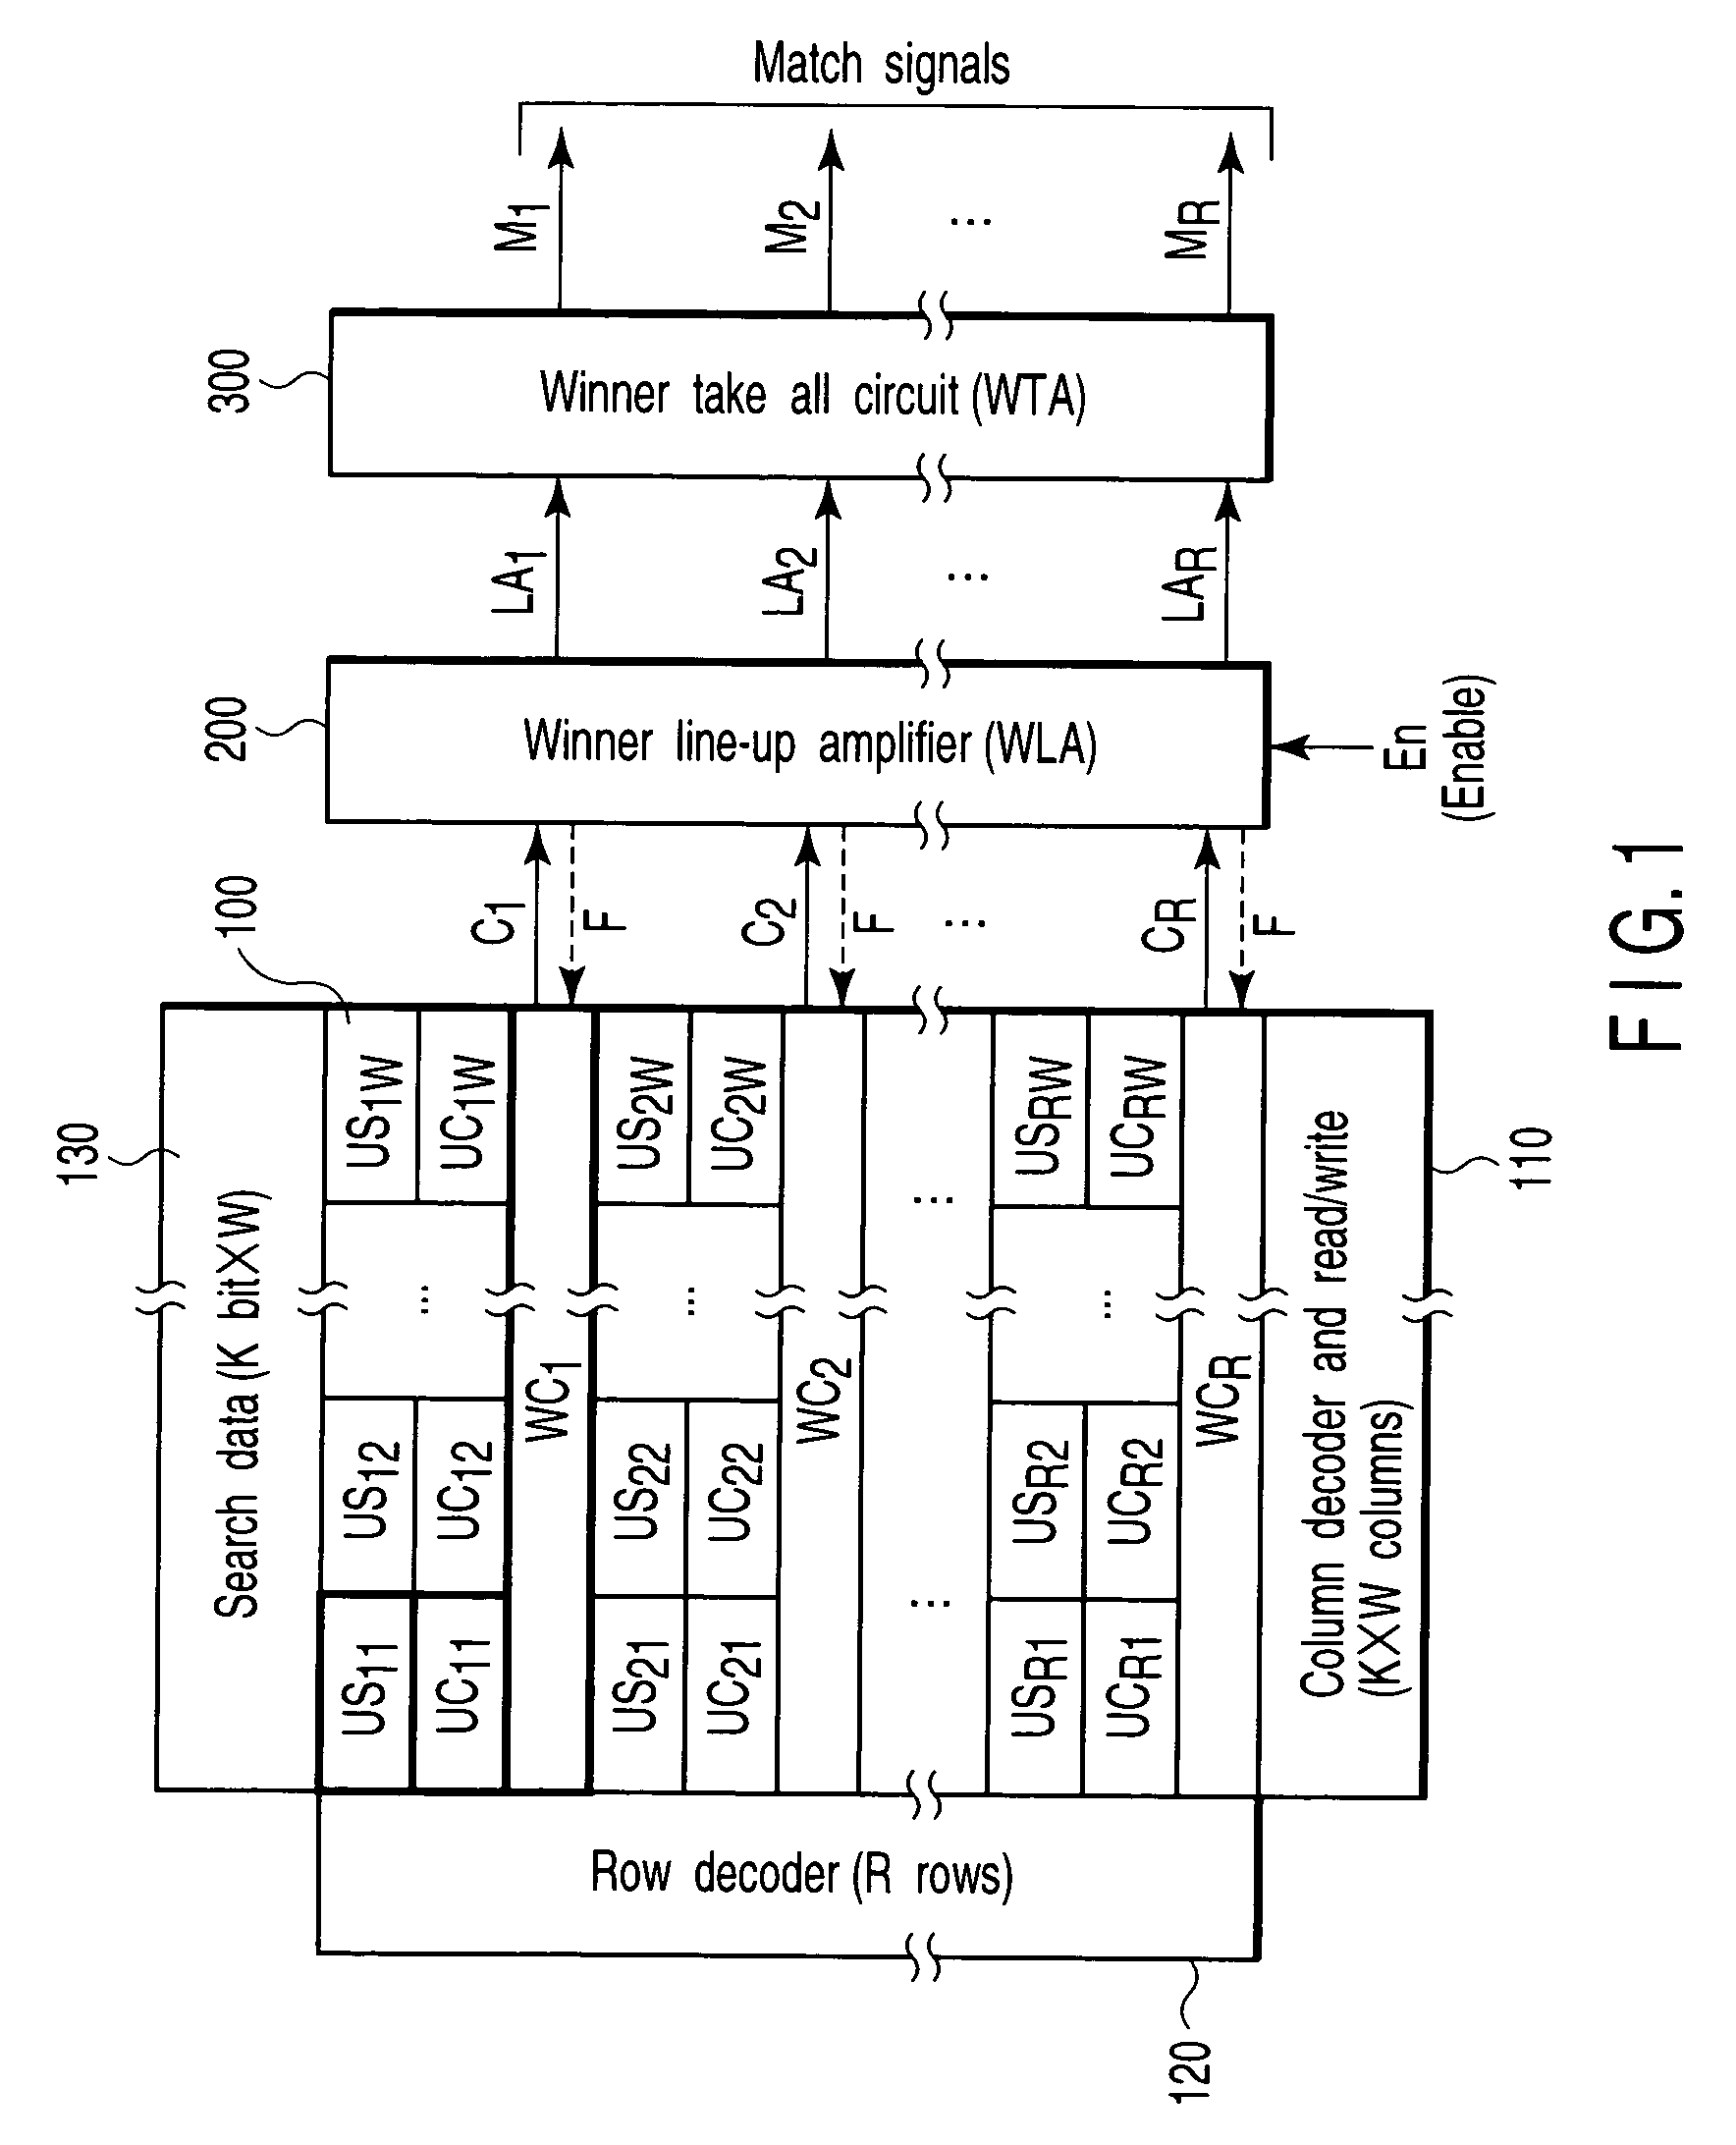 Associative memory apparatus for searching data in which manhattan distance is minimum